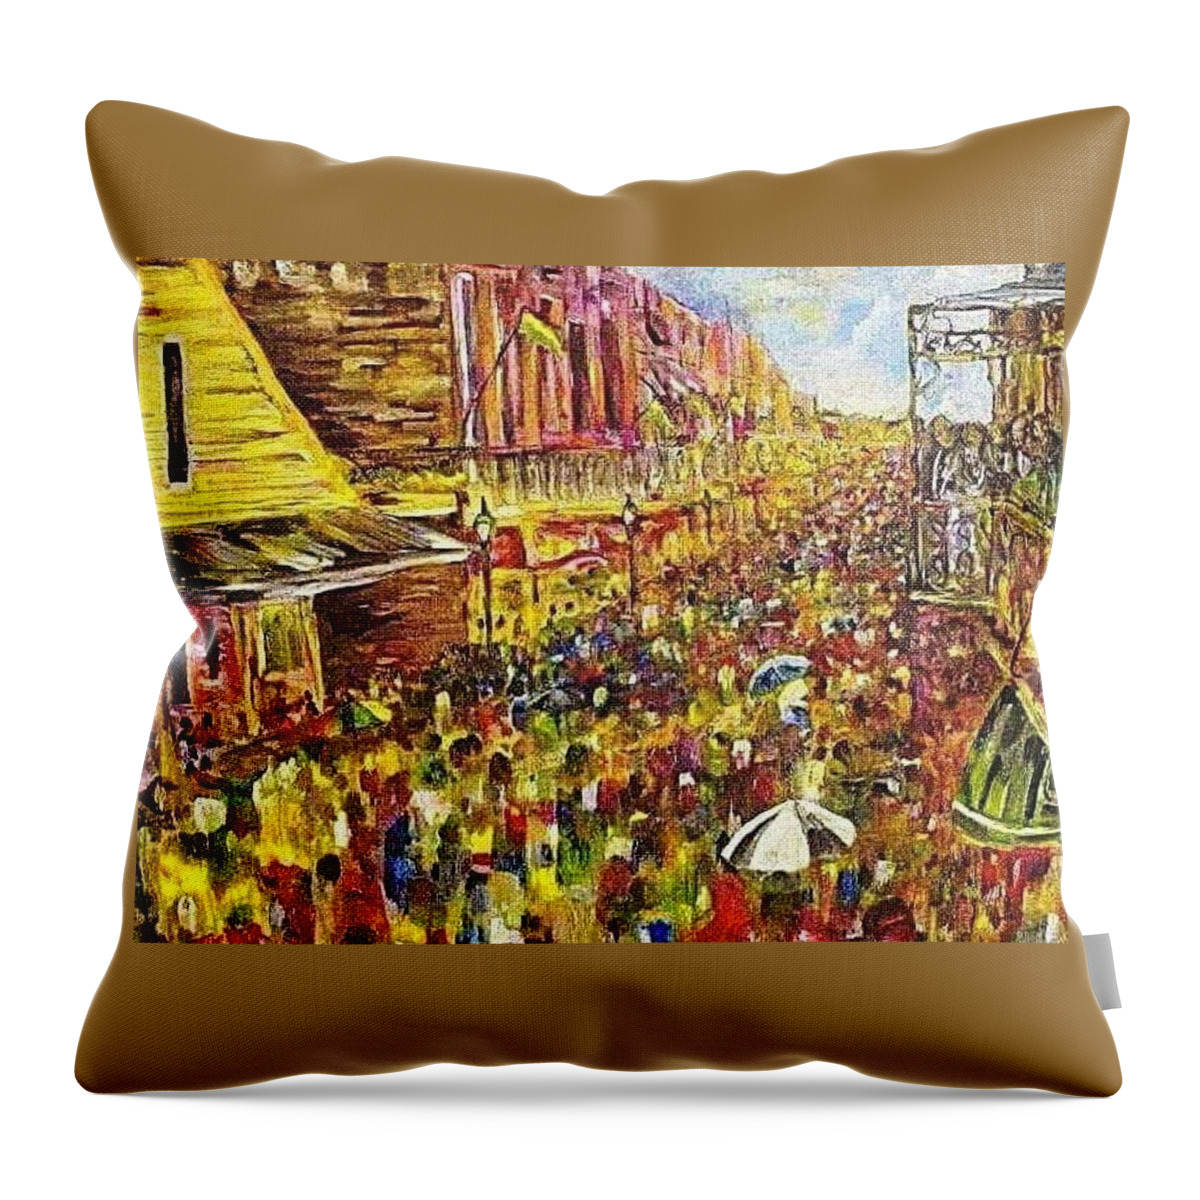 French Quarter Throw Pillow featuring the painting Veaux Carre by Julie TuckerDemps